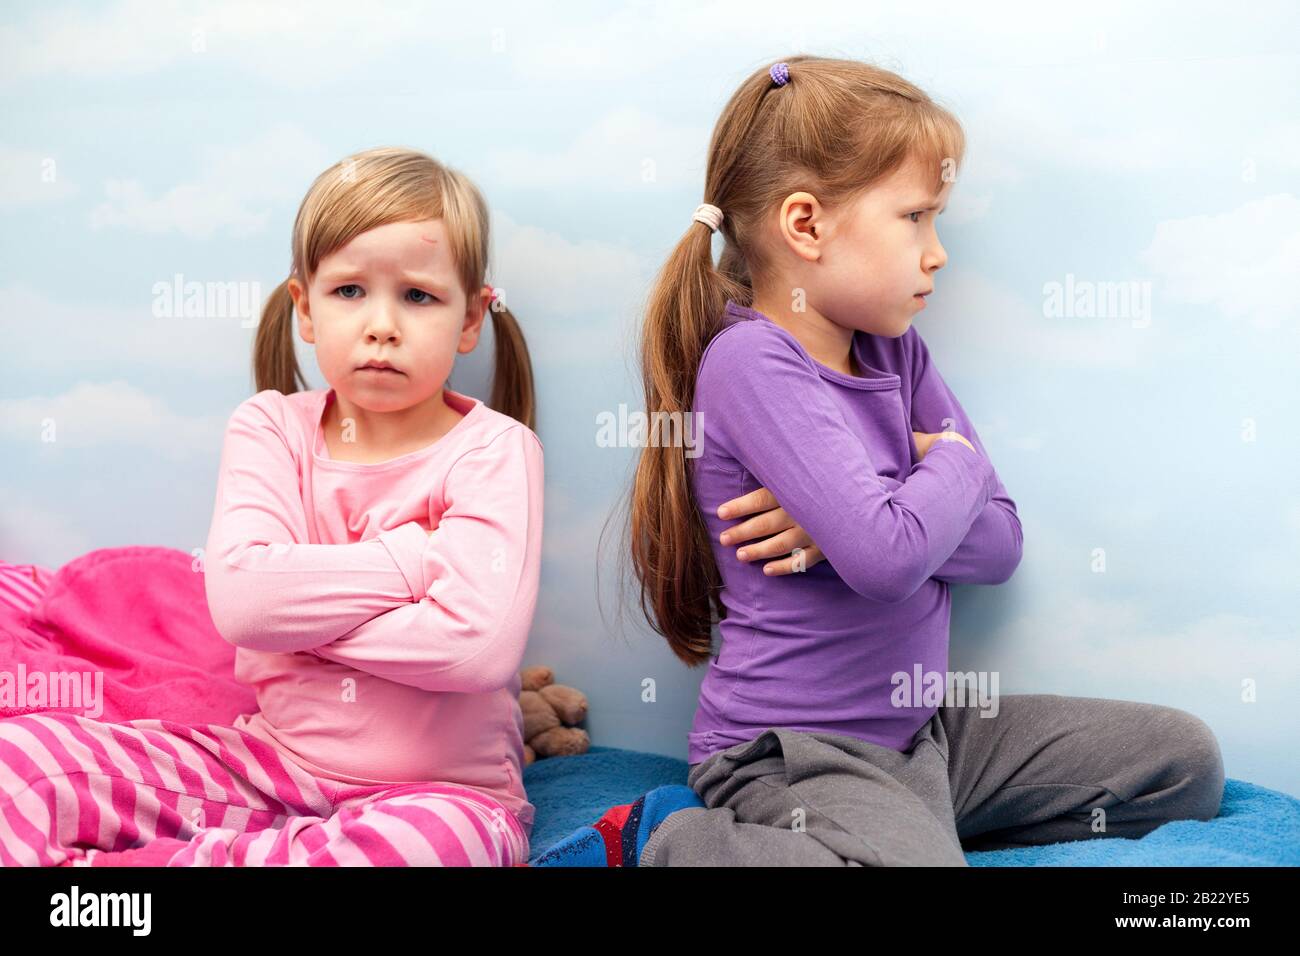 Two young little girls, sisters offended at each other, siblings conflict, fight, taking offence sitting back to back concept. Children, kids family Stock Photo